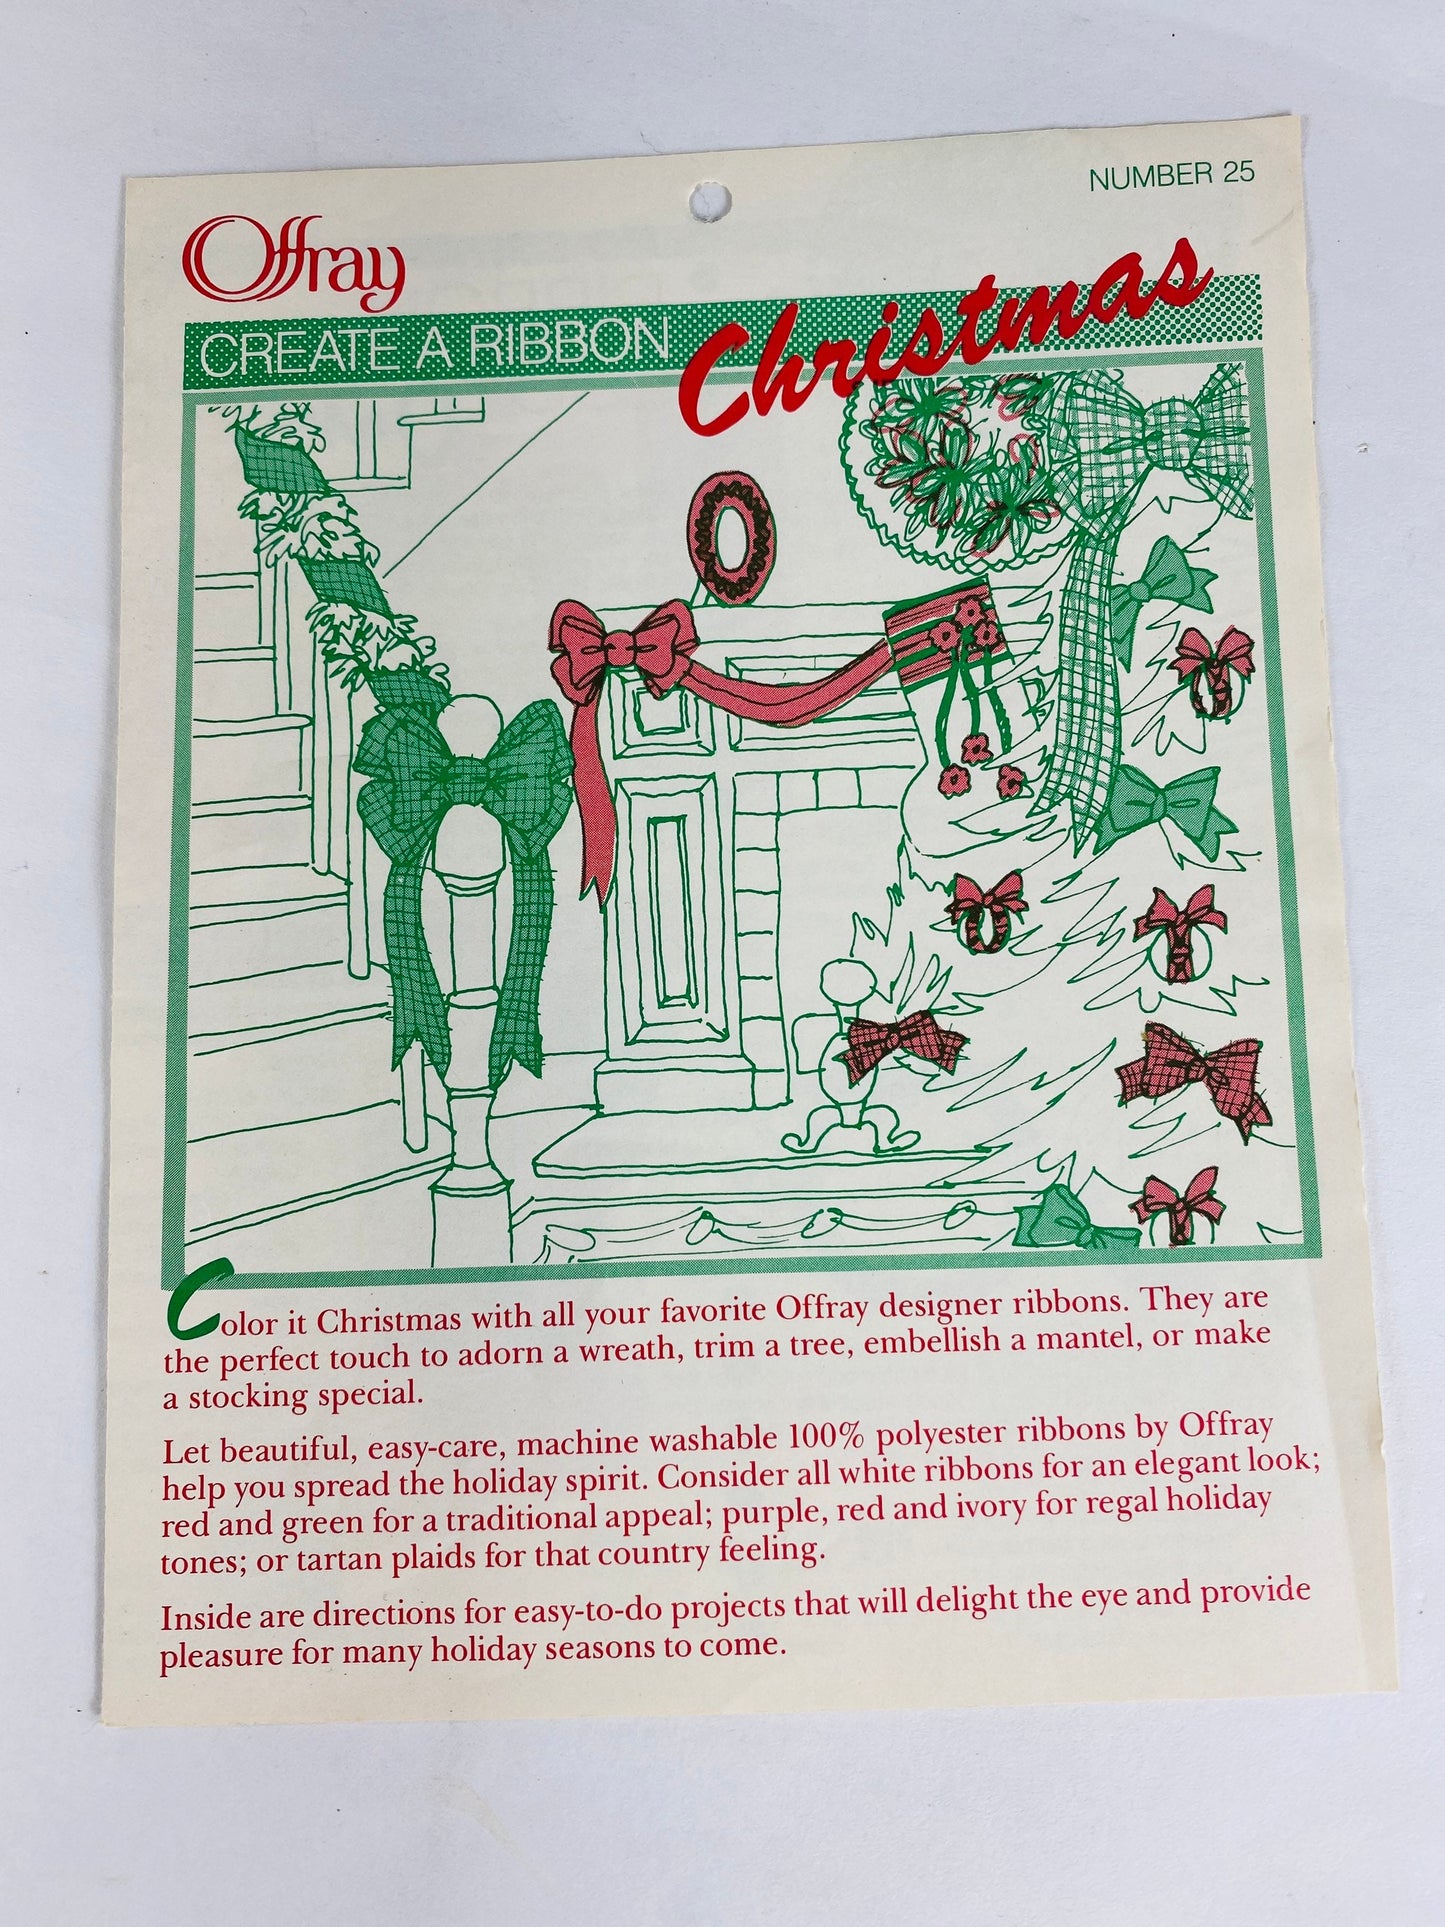 Antique and Vintage Christmas gift tags, postcard, book club card & Offray ribbon instruction booklet. 5 holiday paper lot decor scrapbook